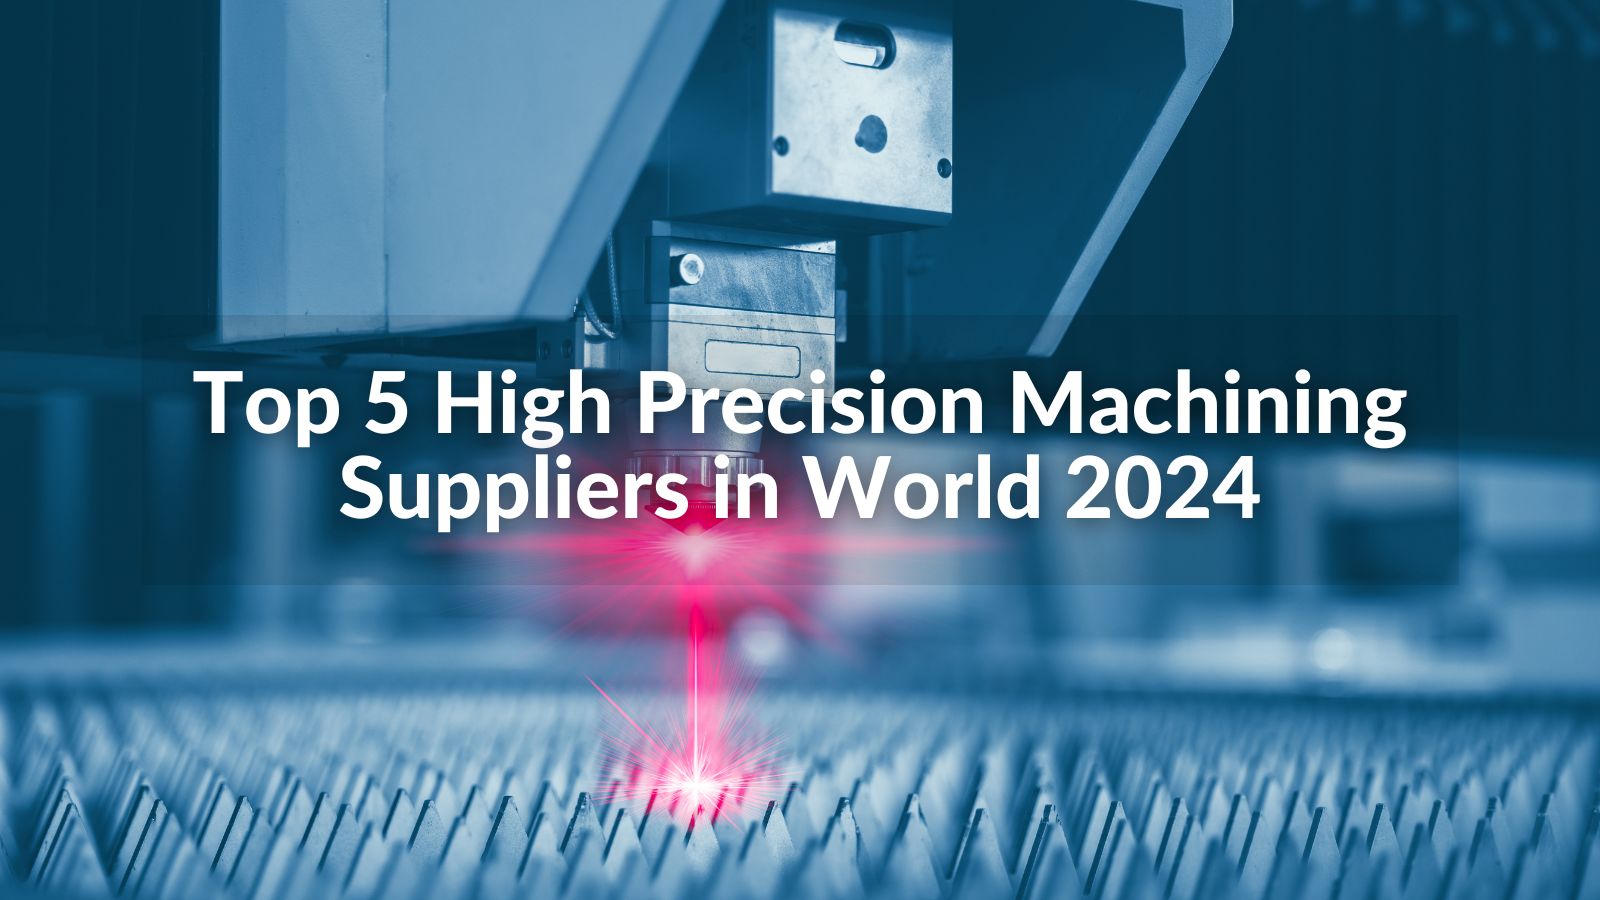 Top 5 High Precision Machining Suppliers in World 2024